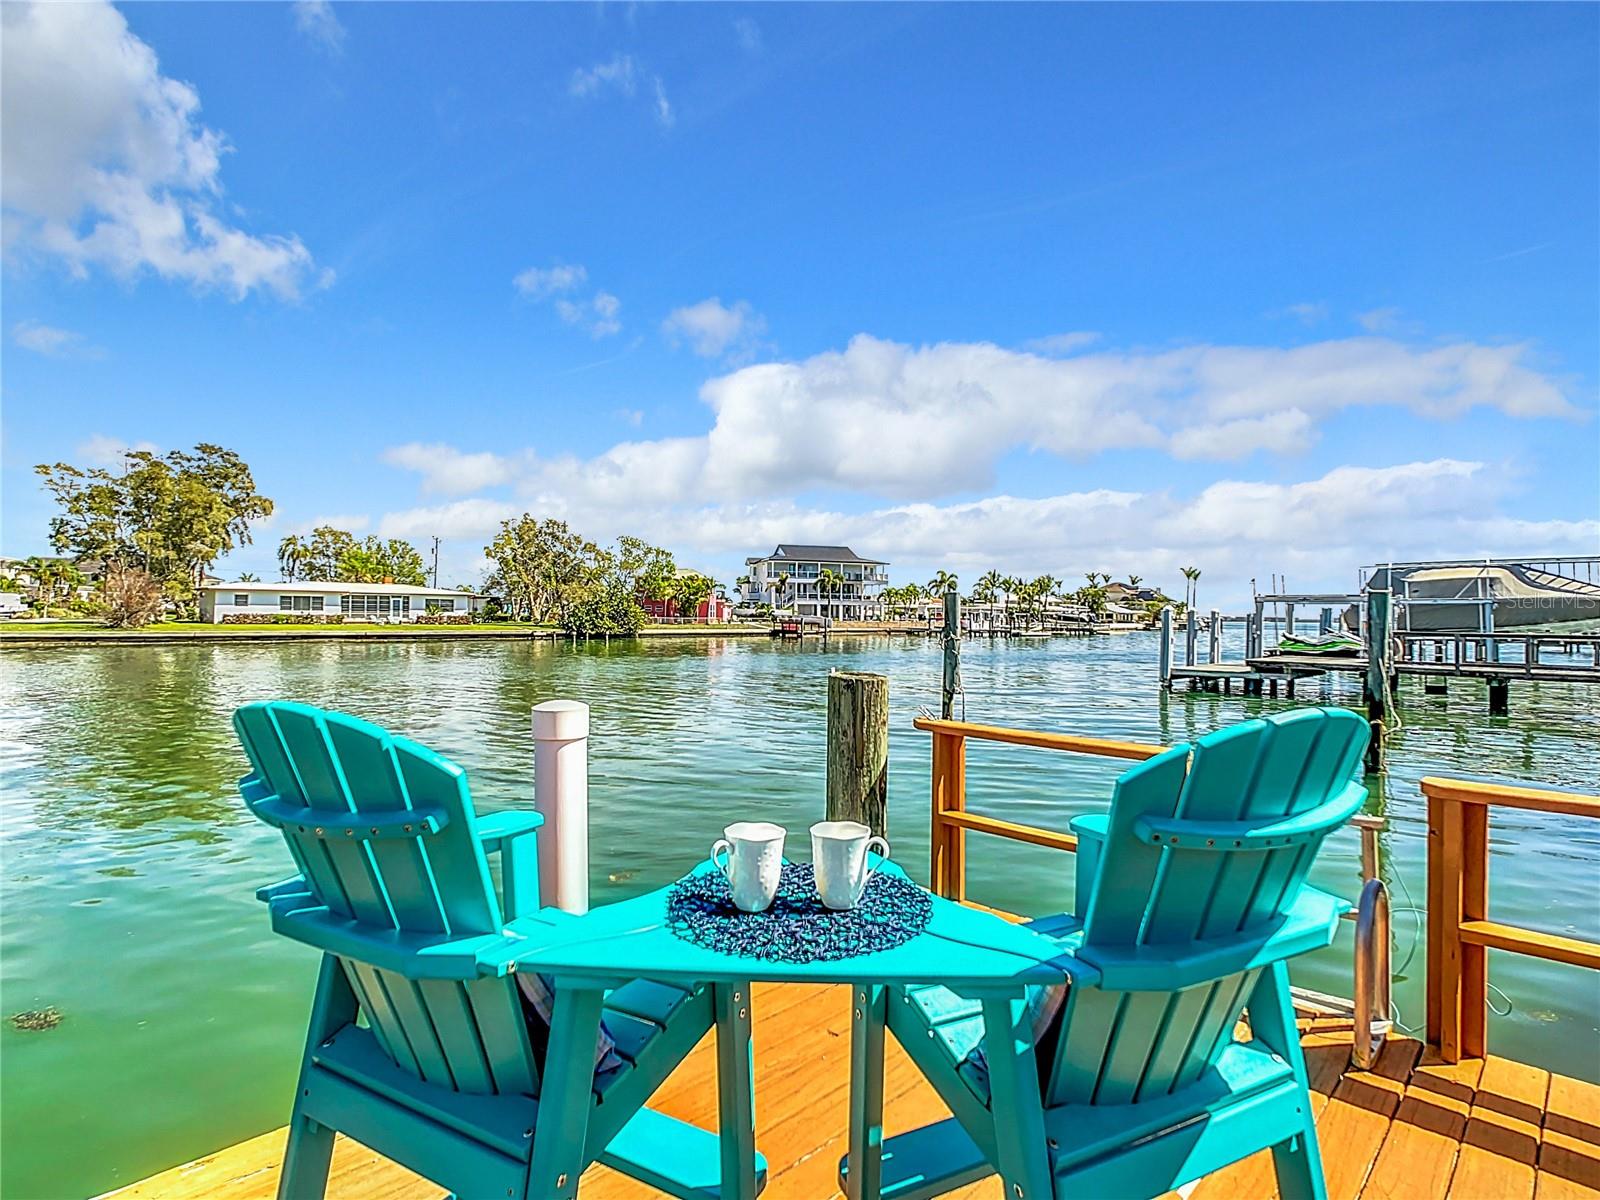 Don't you just feel like humming: "Sittin' on the dock of the Bay" with manatee, dolphin and aquatic bird sightings daily!